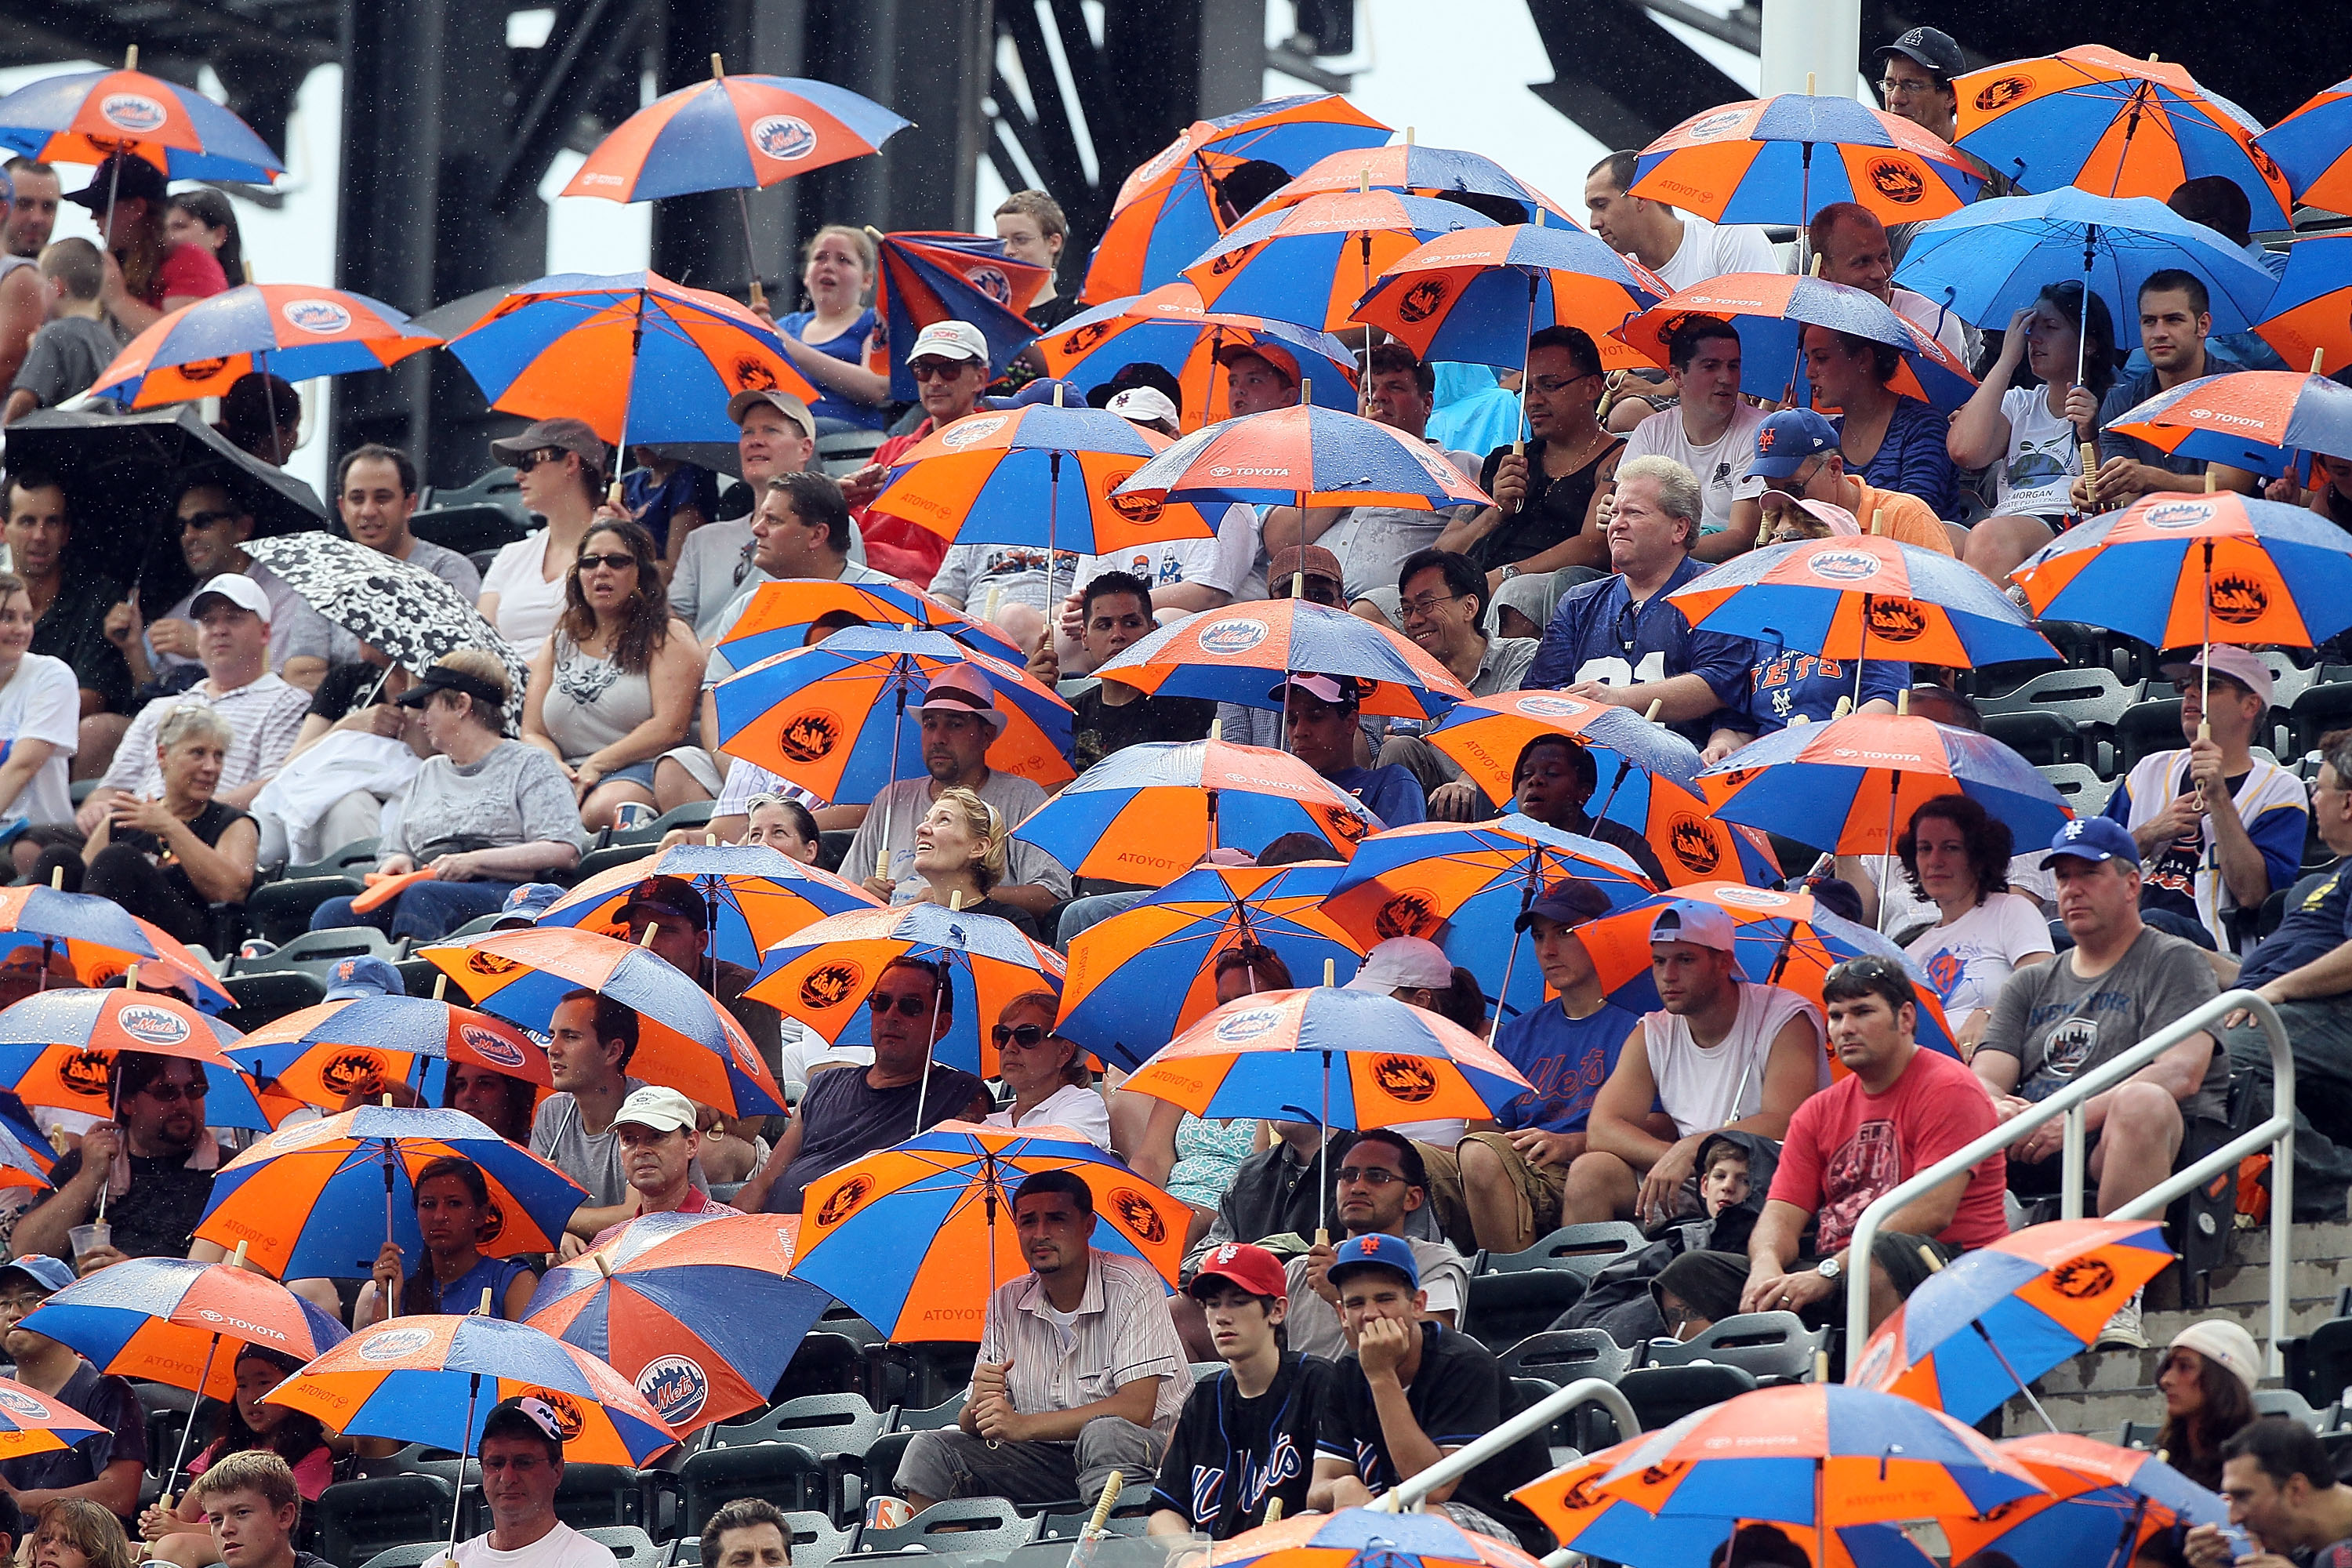 NEW YORK - JULY 29:  Fans break out promotional umbrellas as rain starts to fall as the New York Mets play against the St. Louis Cardinals on July 29, 2010 at Citi Field in the Flushing neighborhood of the Queens borough of New York City. The Mets defeate